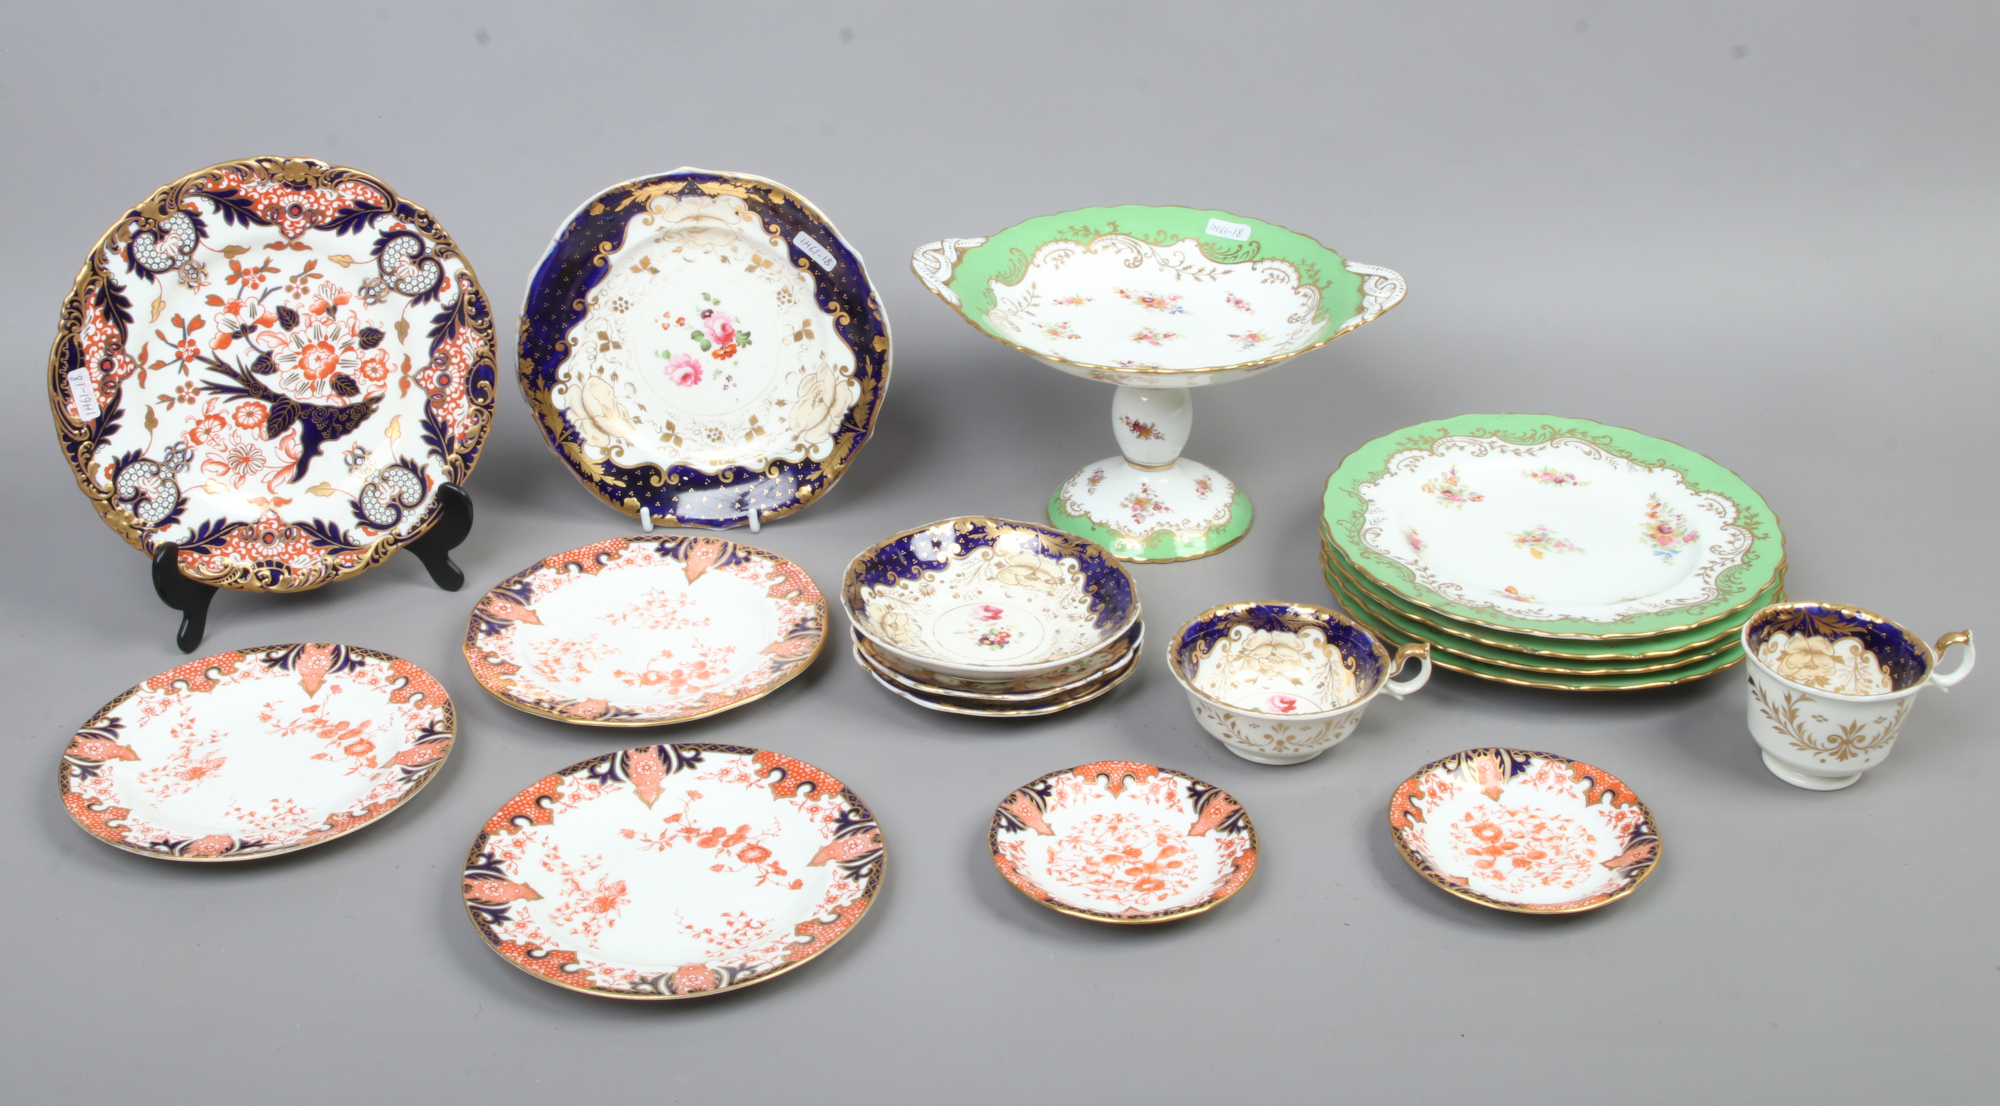 A collection of early 19th century English porcelain teawares to also include Coalport and Royal